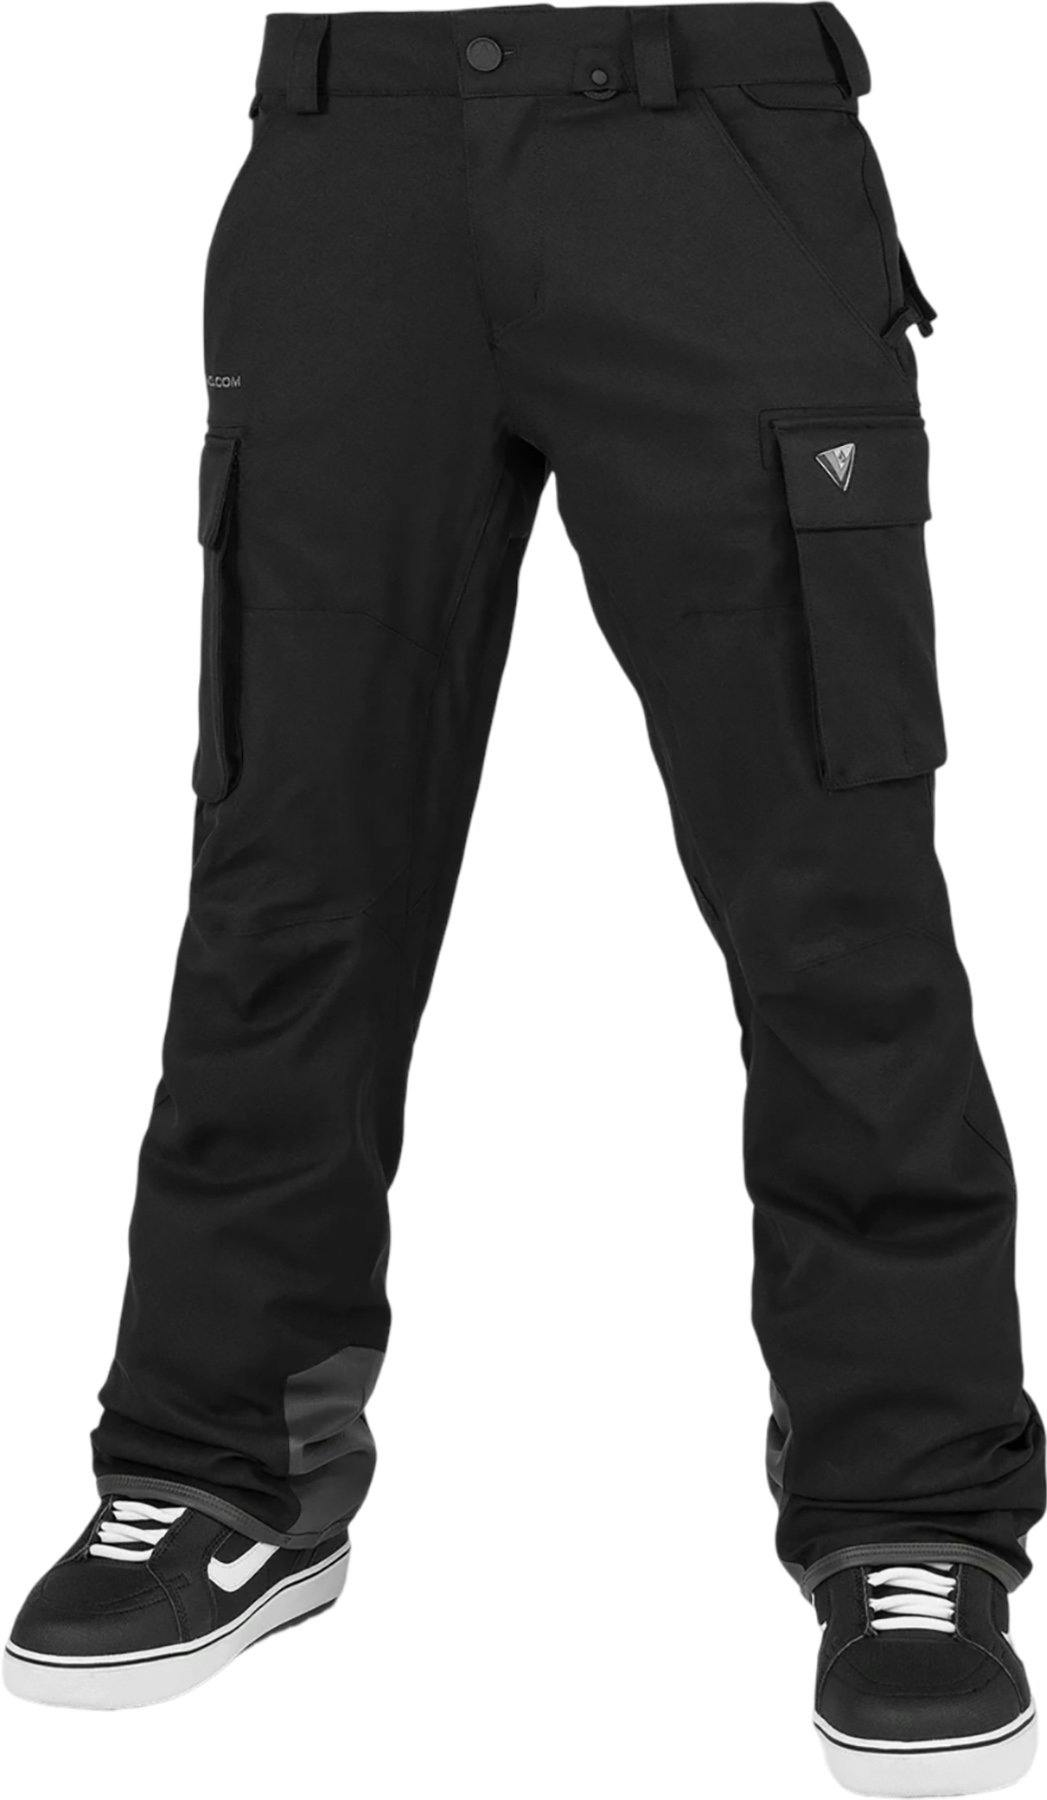 Product image for New Articulated Trousers - Men's